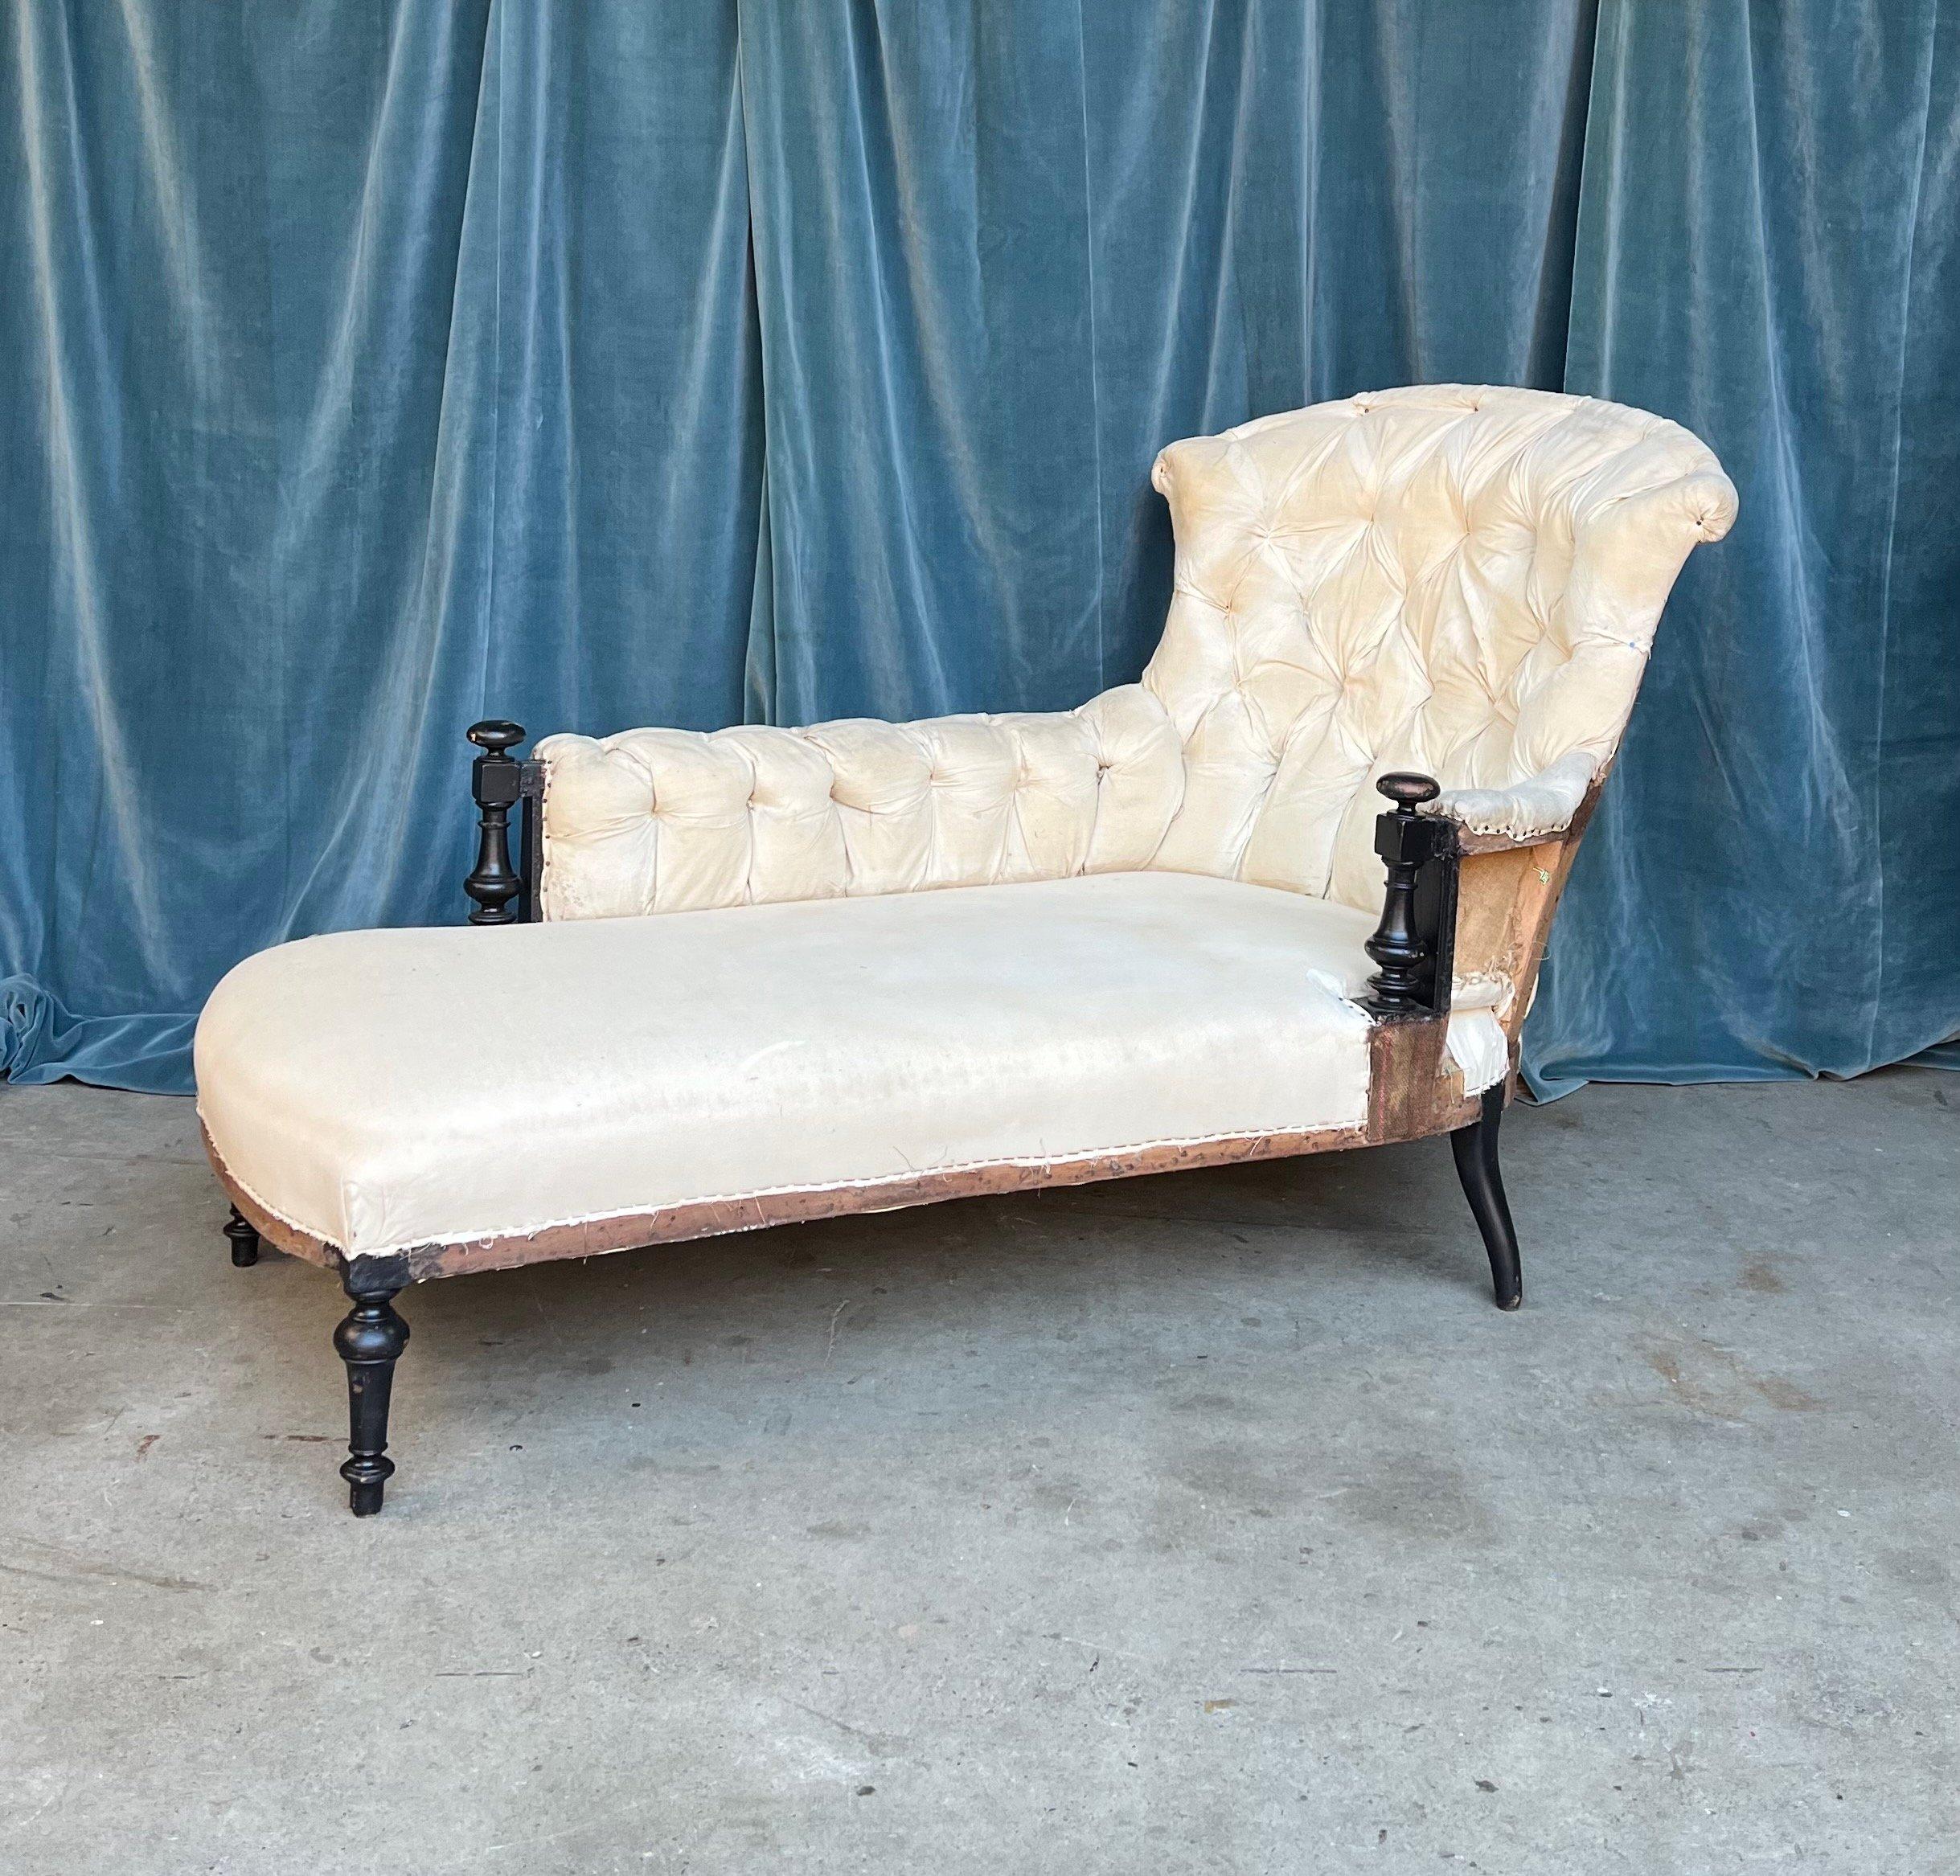 Classic French 19th century Napoleon III tufted chaise lounge with exposed wooden details on the arms. The chaise has been stripped down to the muslin and is ready to be upholstered. The asymmetrical chaise is “right- armed” and the front has a